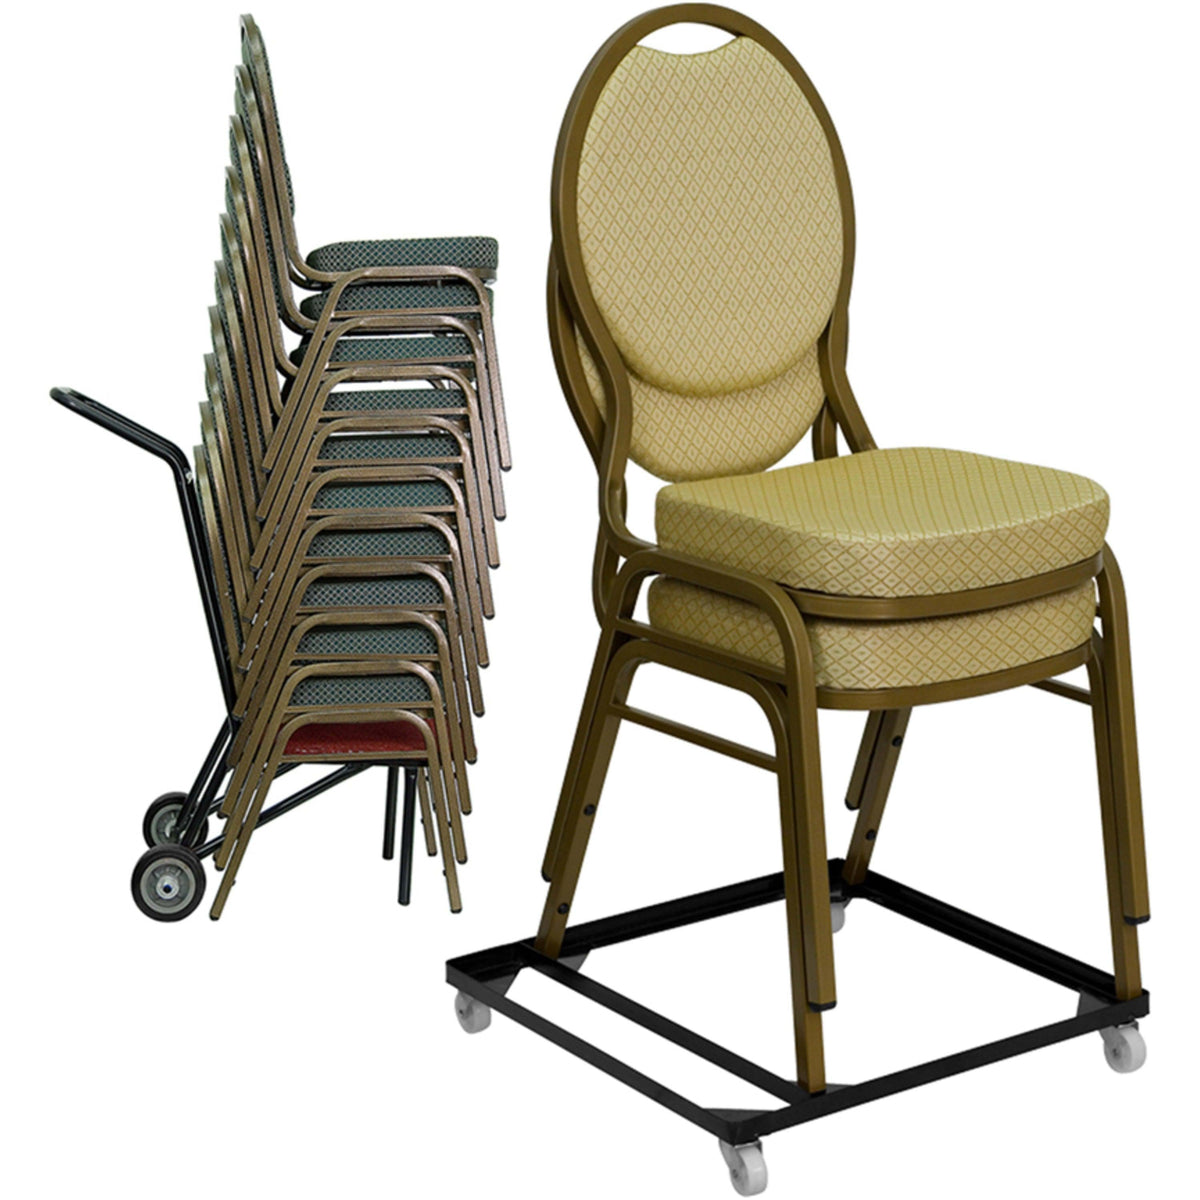 Essential Pack of Stack Chair Dollies - Moving Equipment - Maintenance Equipment